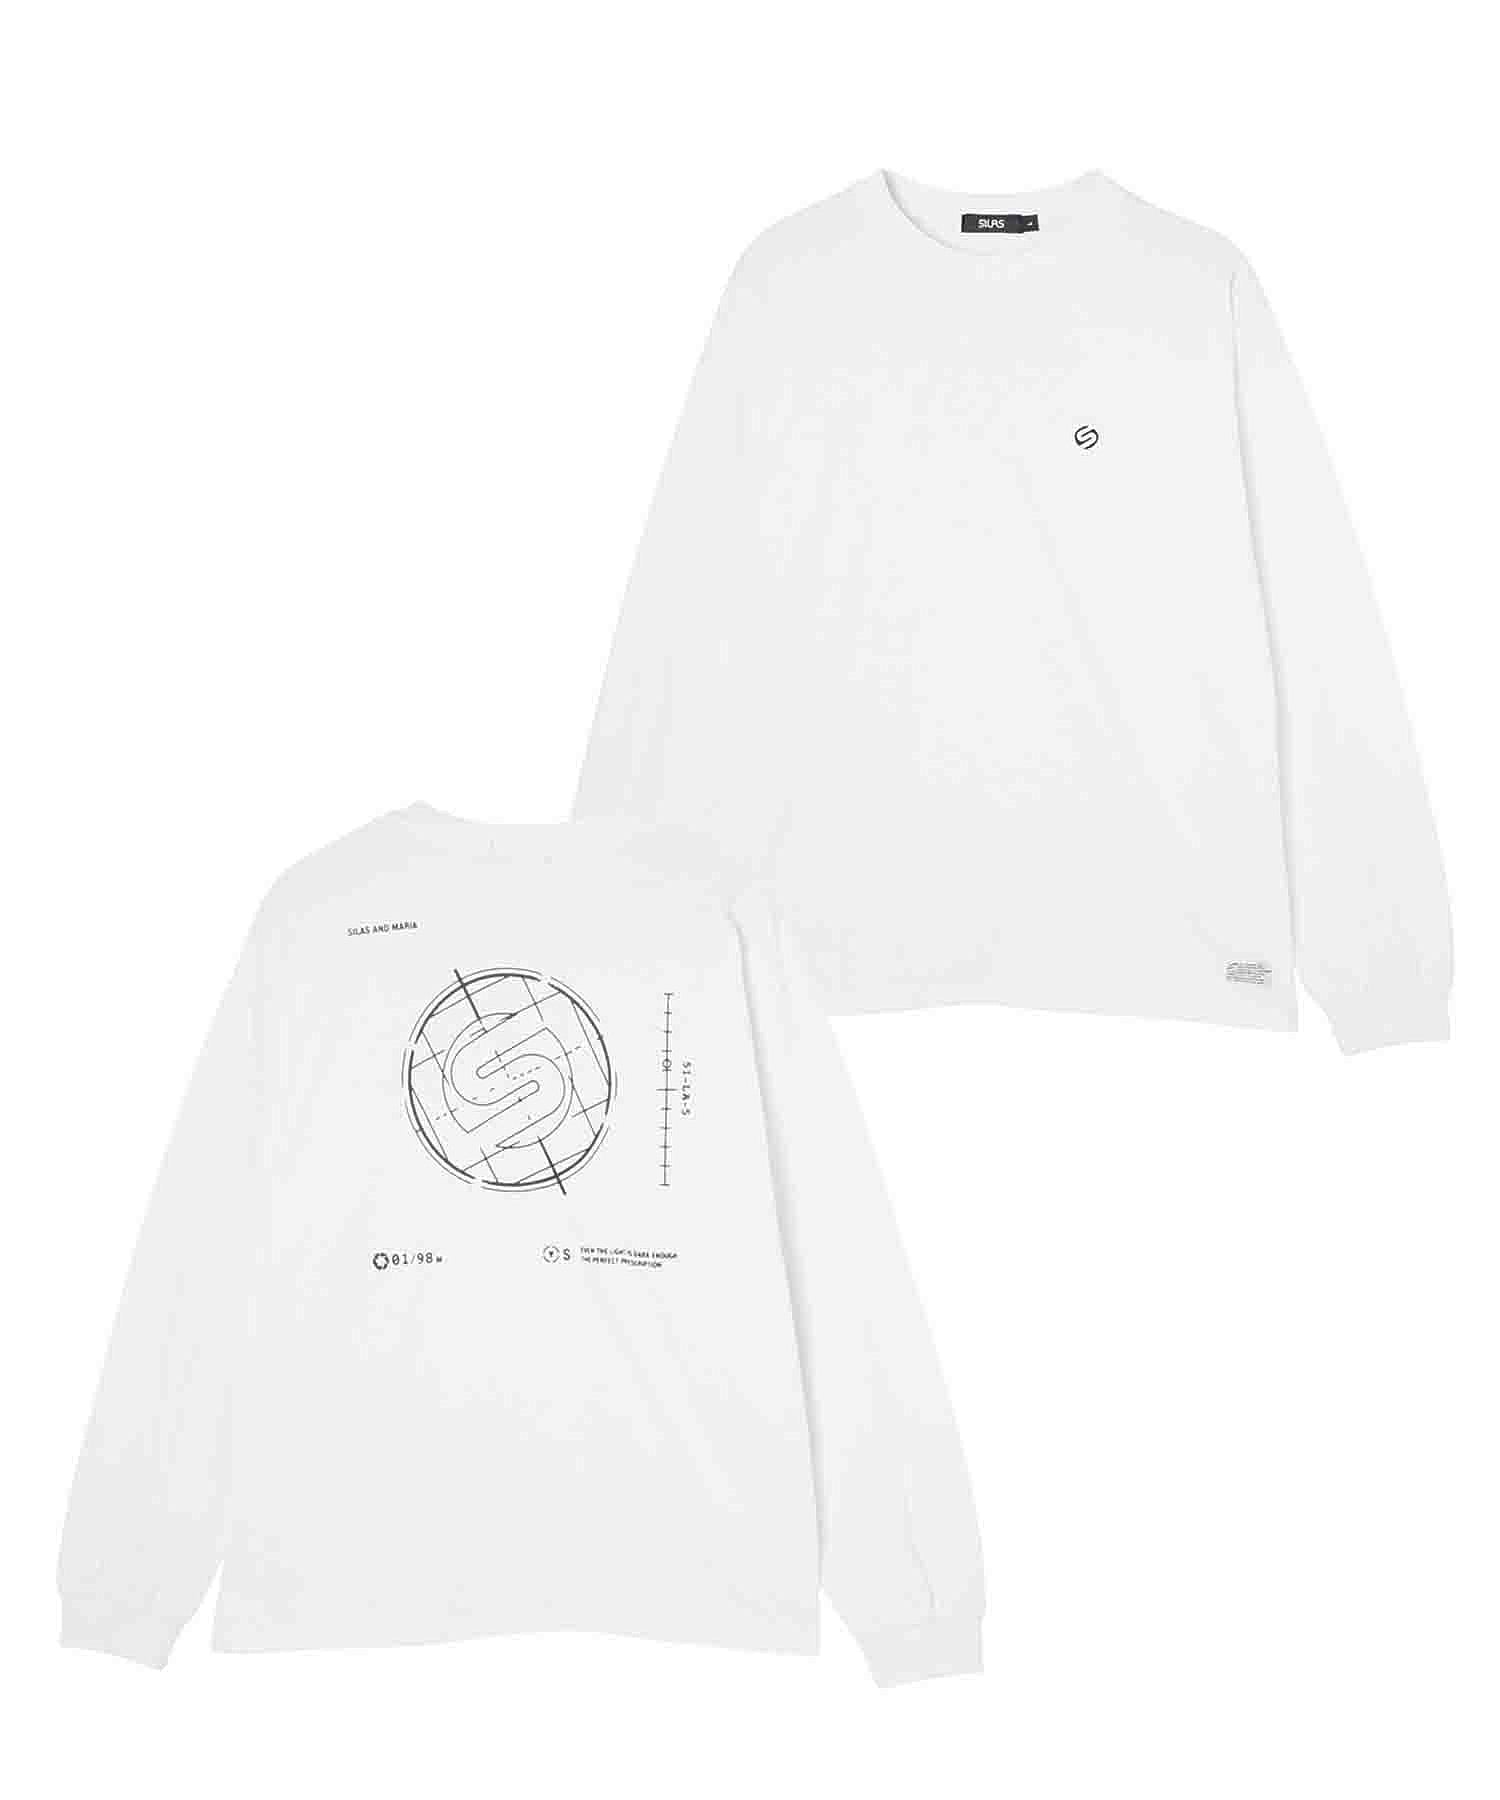 SCOPE WIDE LS TEE SILAS